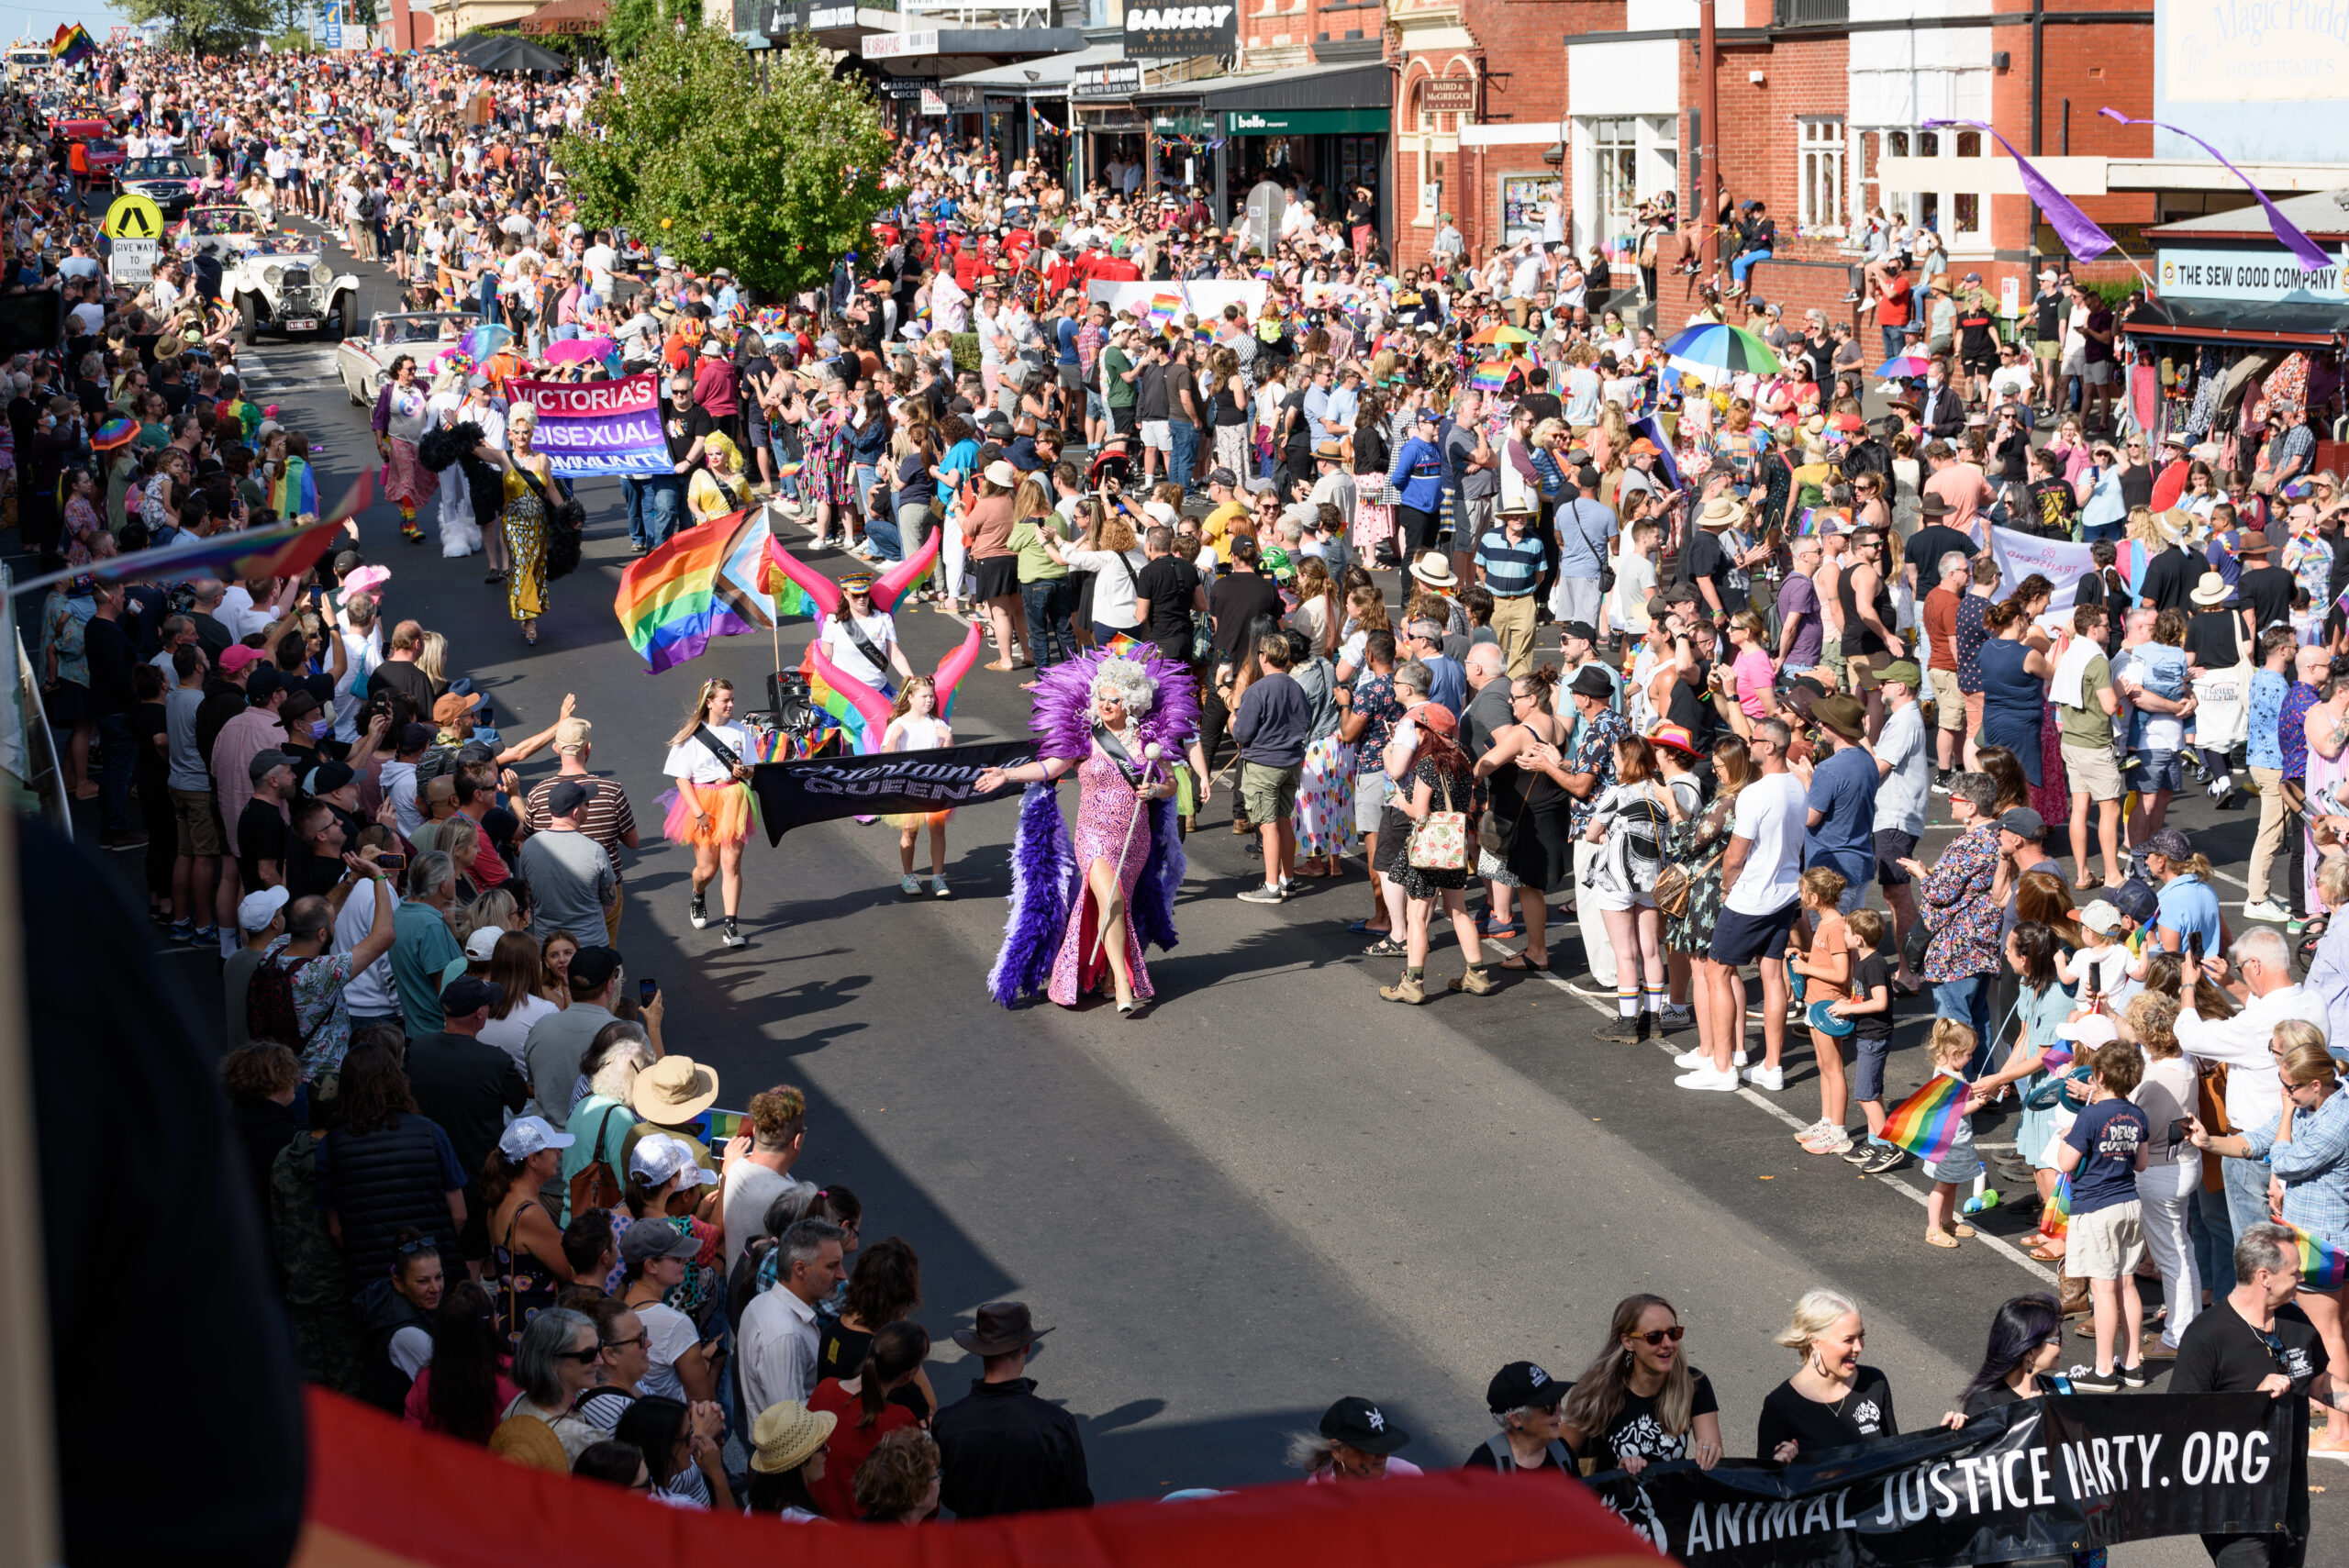 Parade at ChillOut Festival (Photo Credit: Michelle Donnelly)